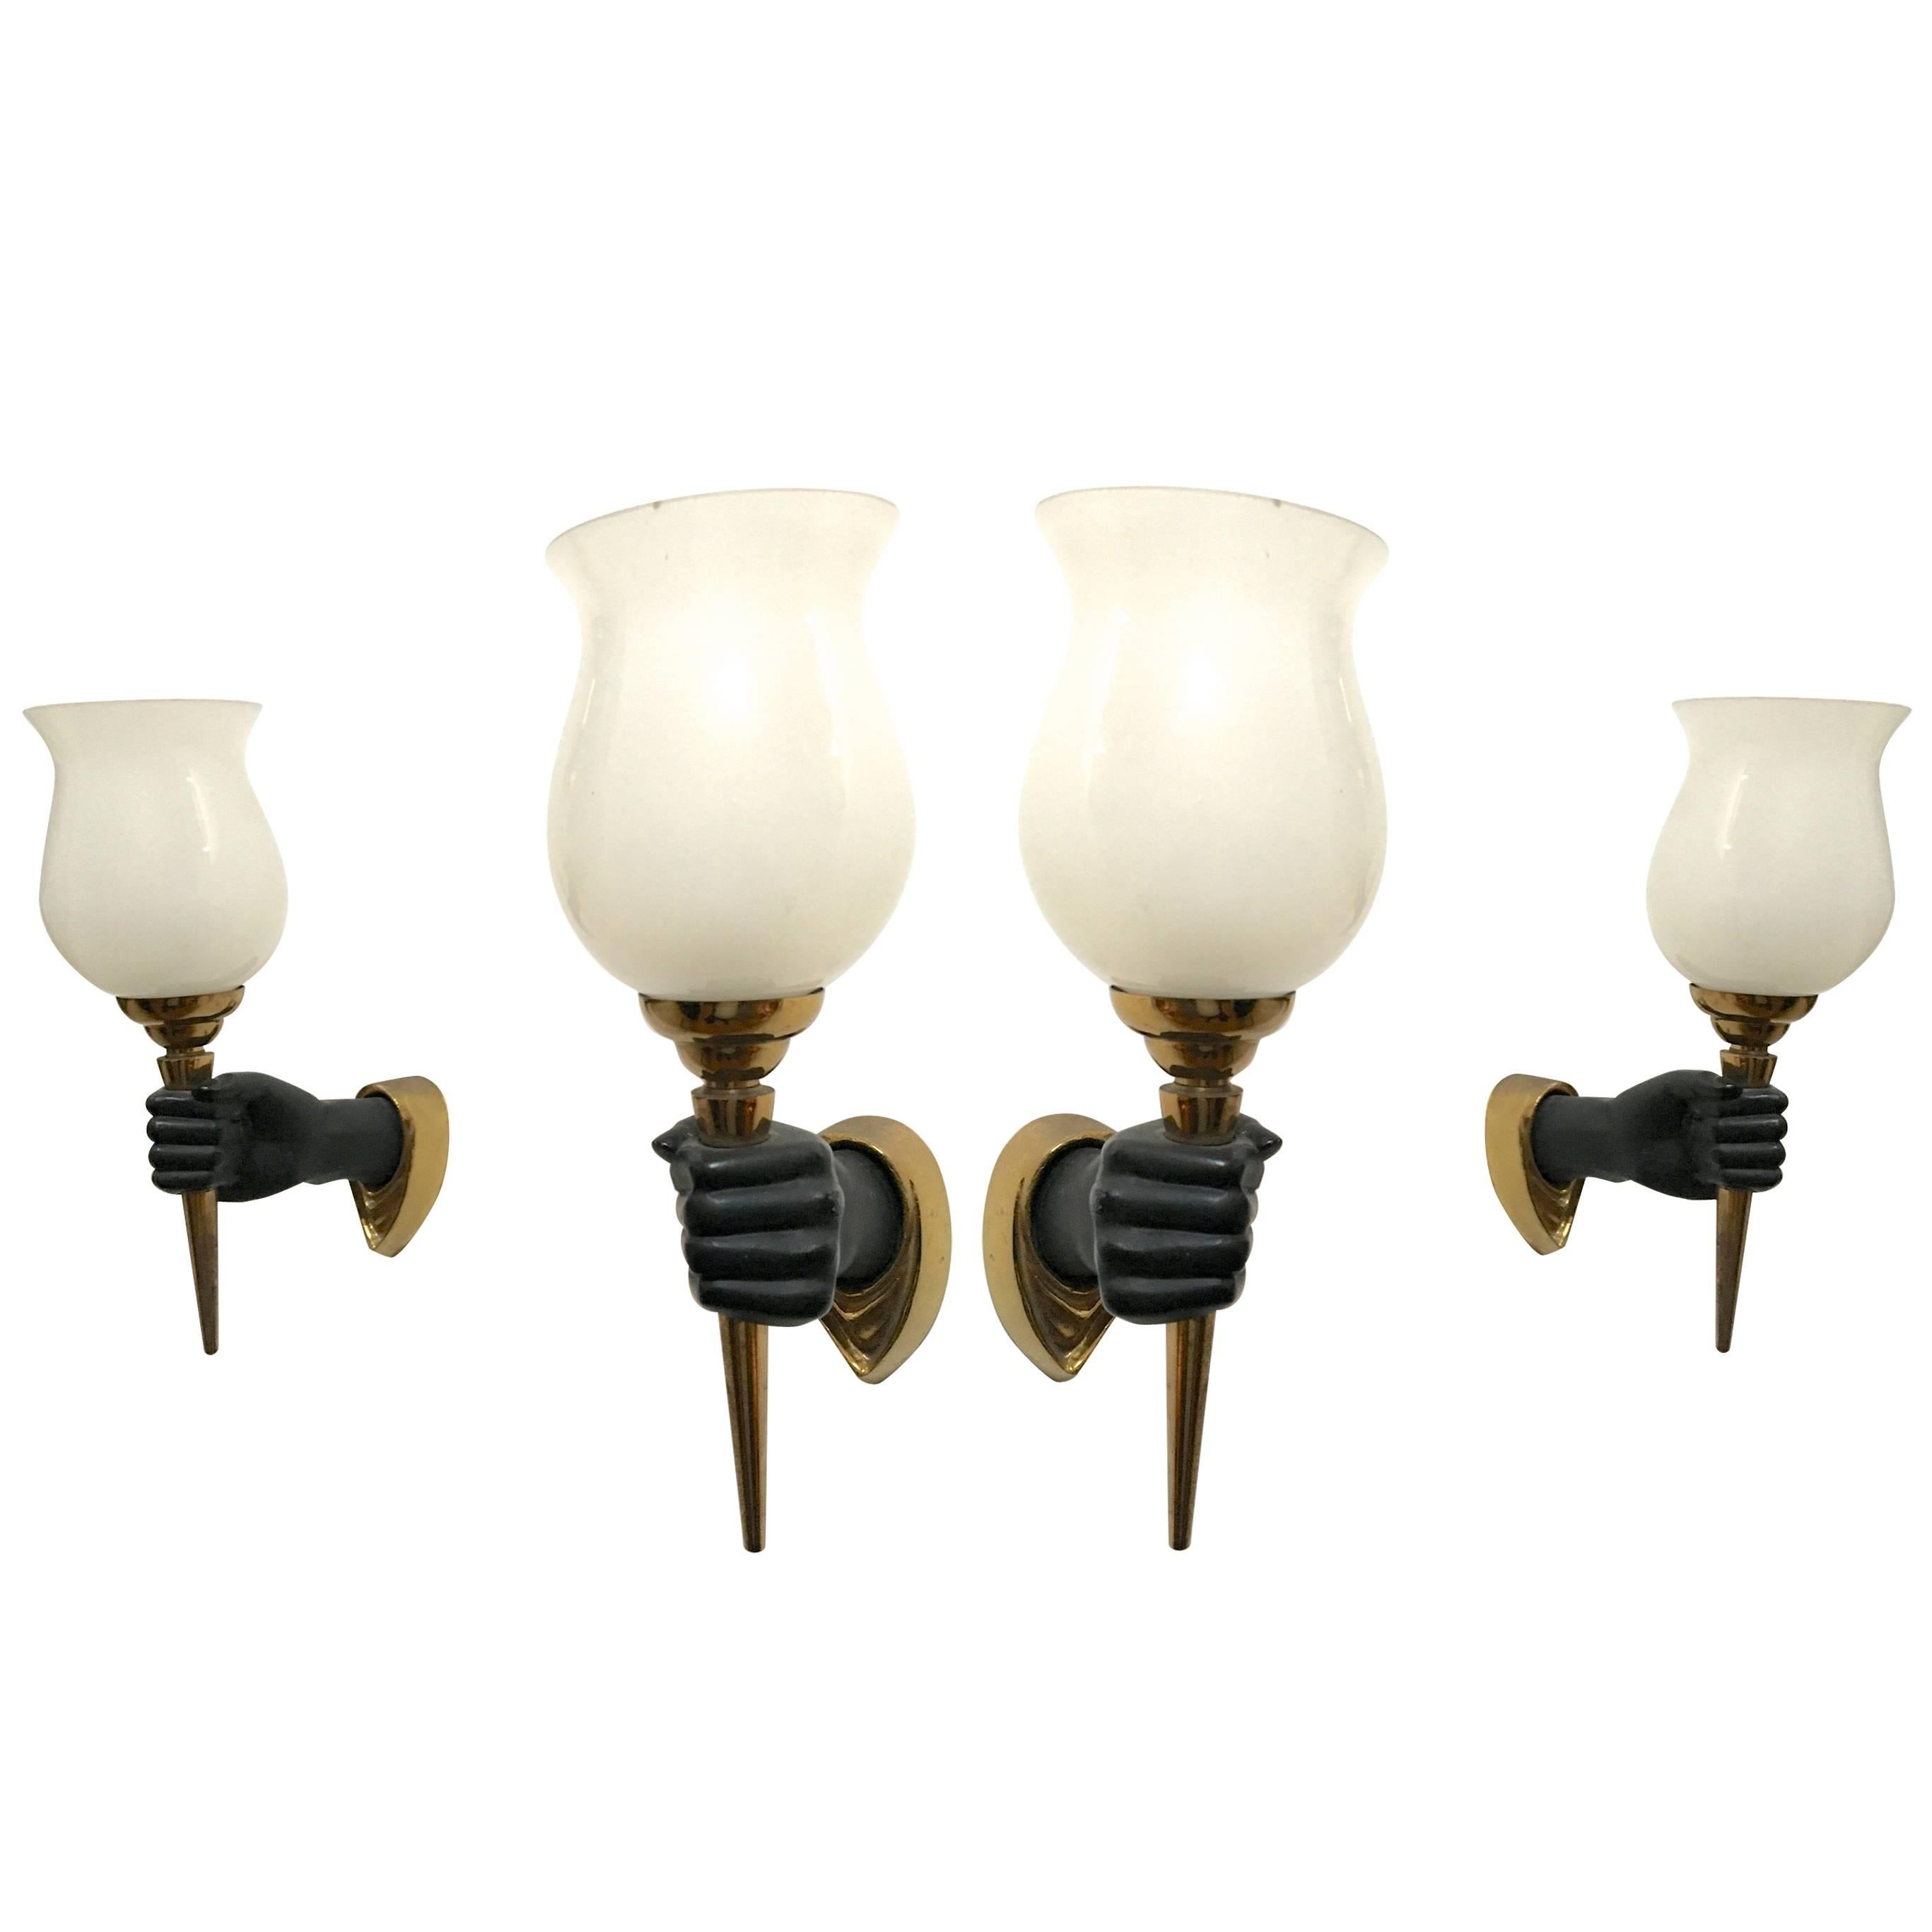 Rare John Devoluy set of 4 Black Patine Hand Sconces with Gold Bronze Contrast For Sale